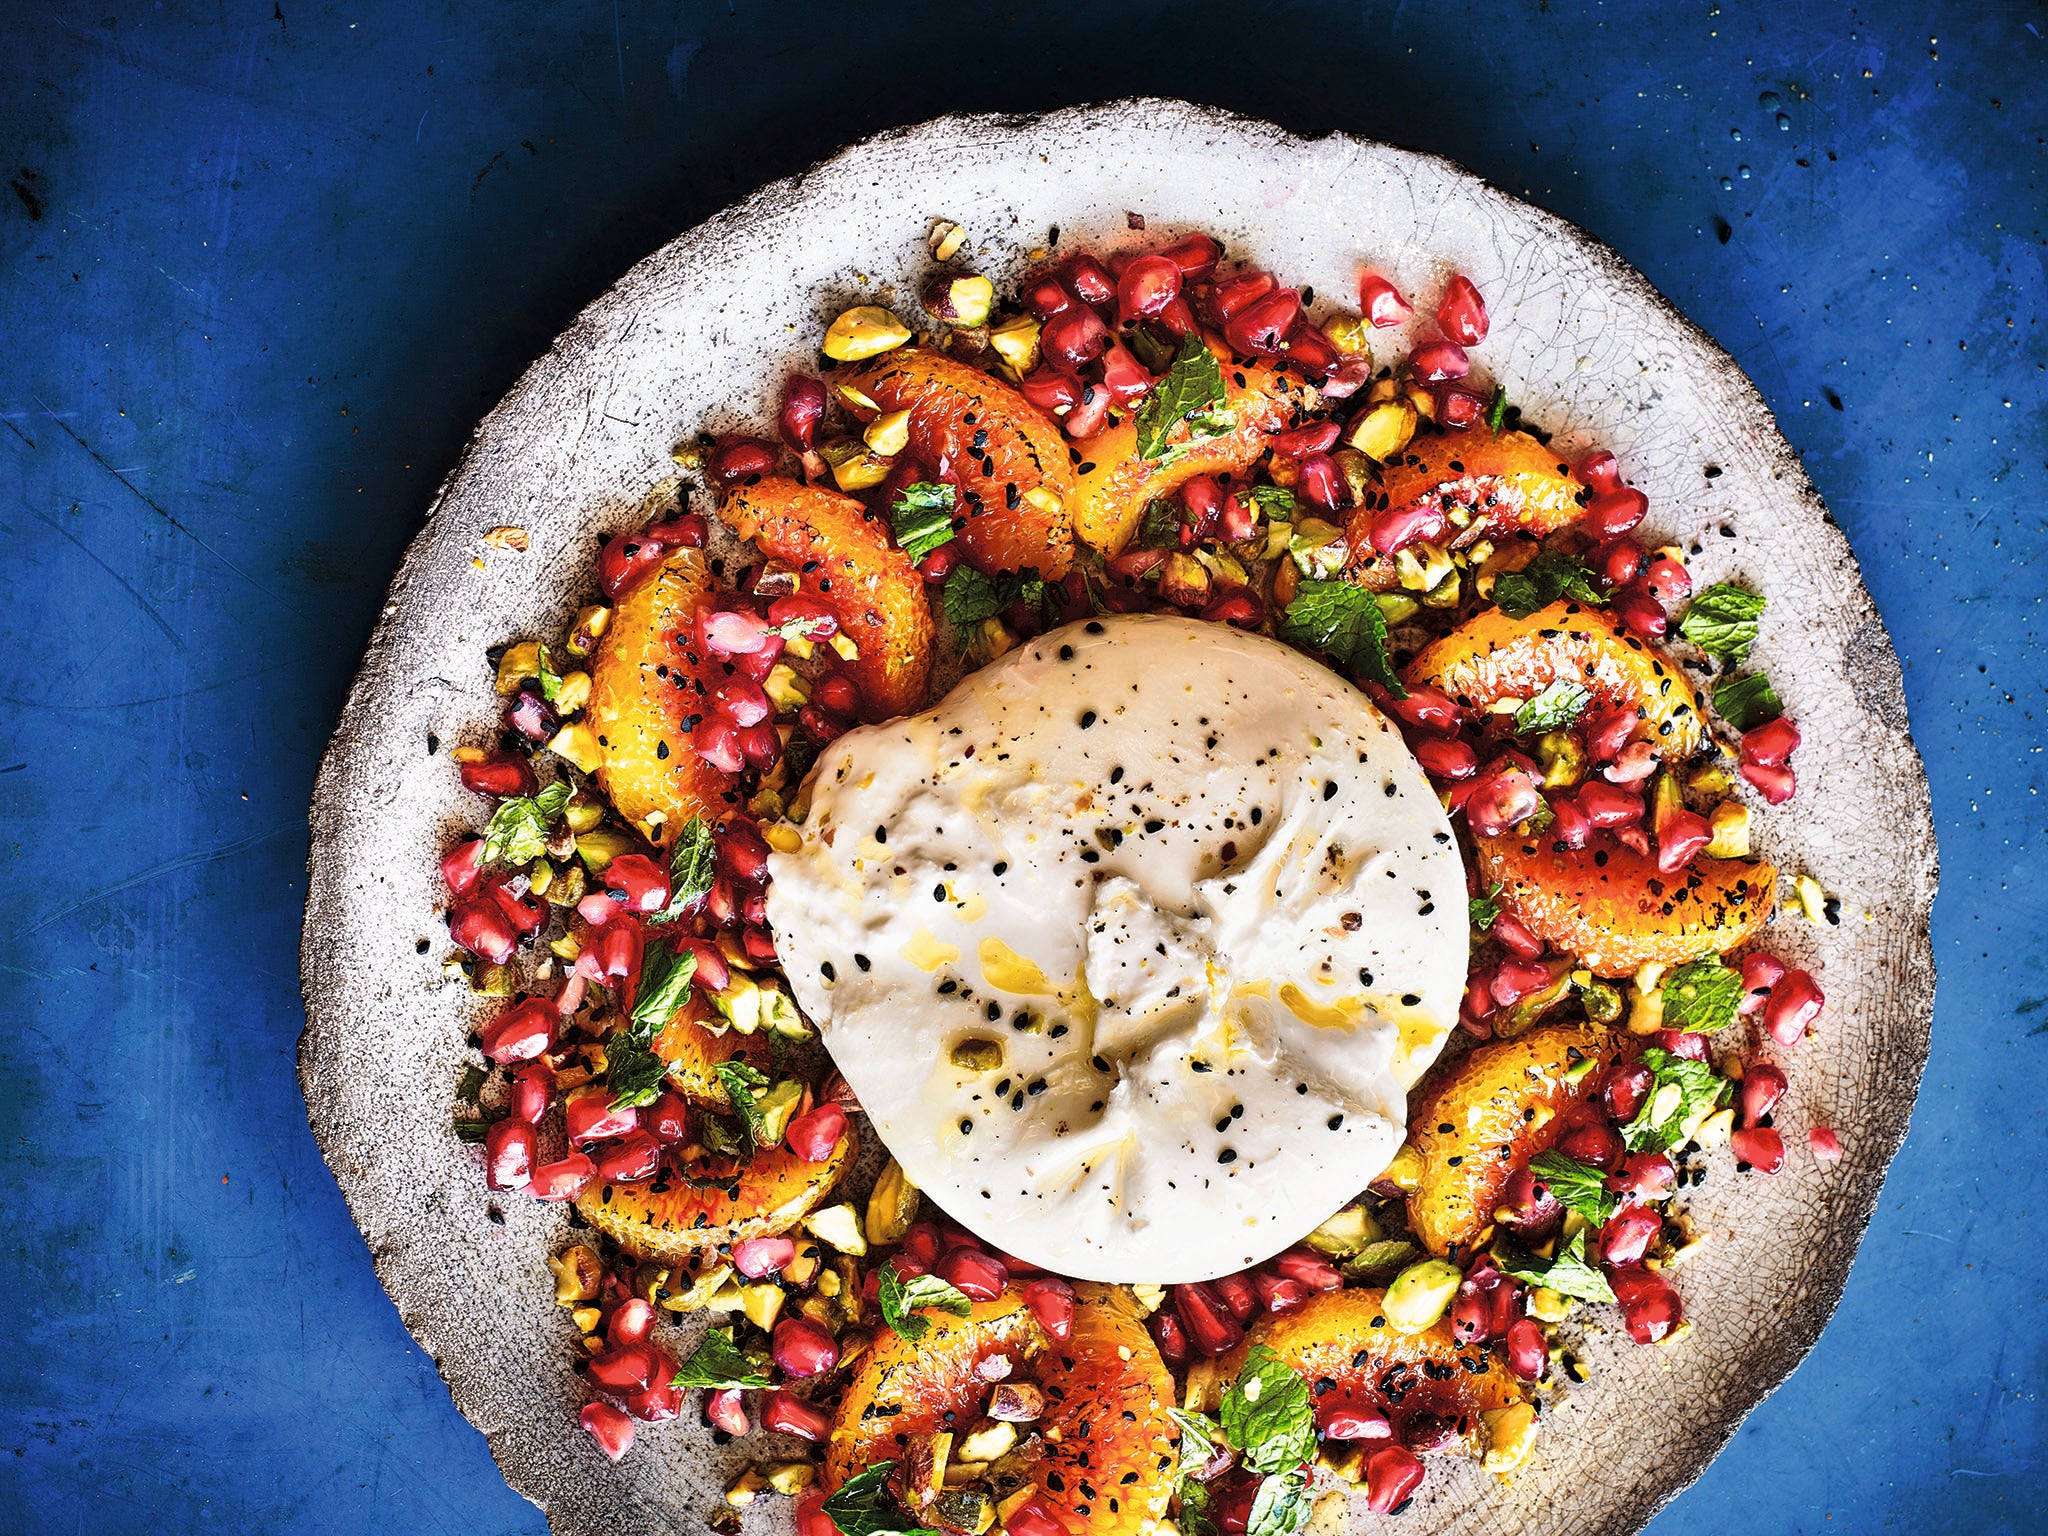 Crowned jewels: pistachios, pomegranate and nigella seeds with burnt oranges, topped with burrata cheese